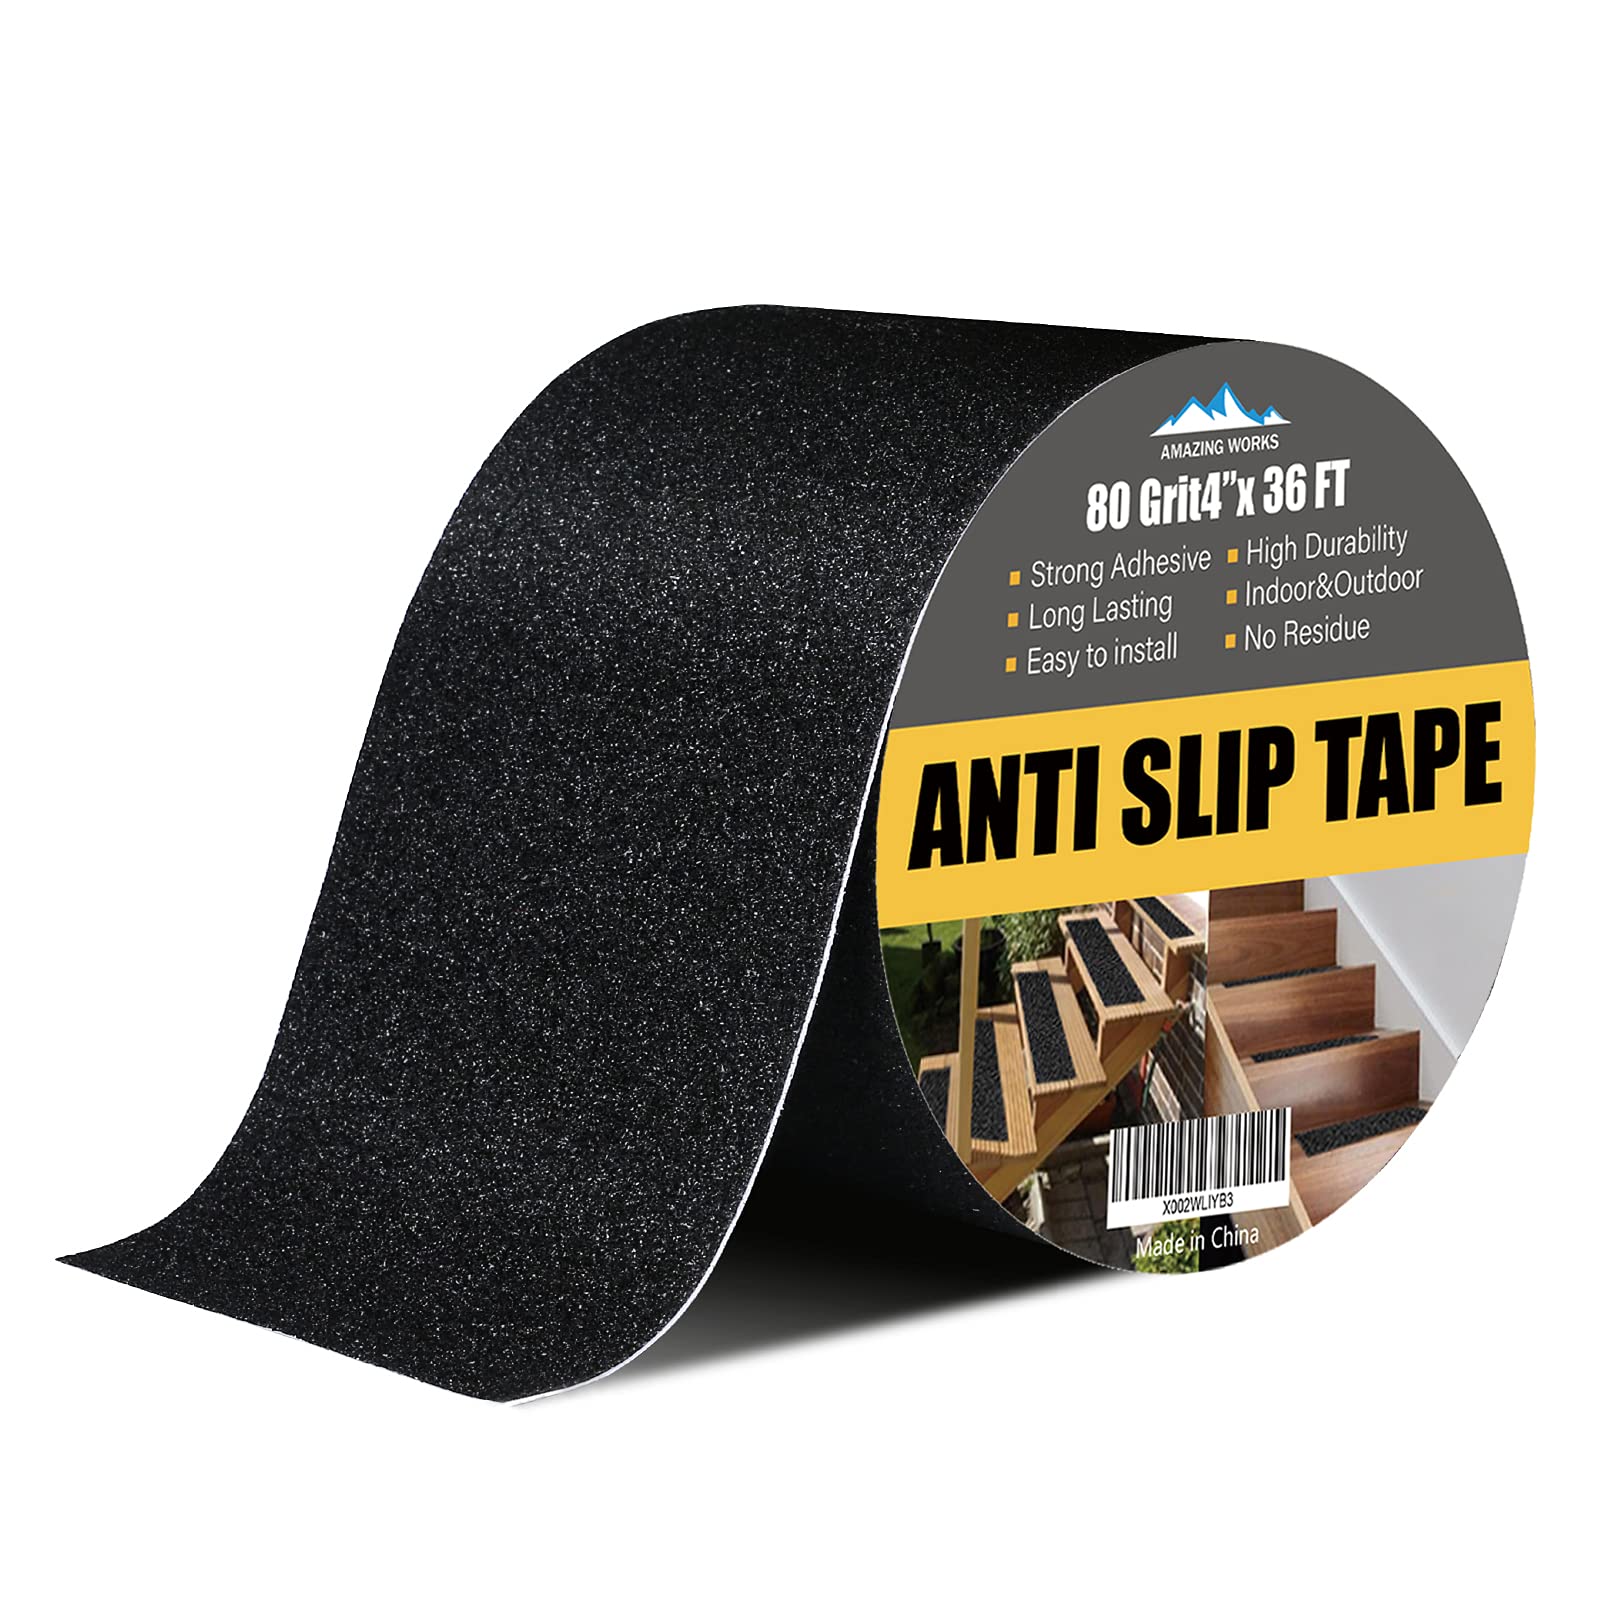 Amazing Works Grip Tape - 4Inch x 36Feet Heavy Duty Anti Slip Tape High Traction 80 Grit Non Skid Tape for Stairs, Waterproof Anti Slip Tape D